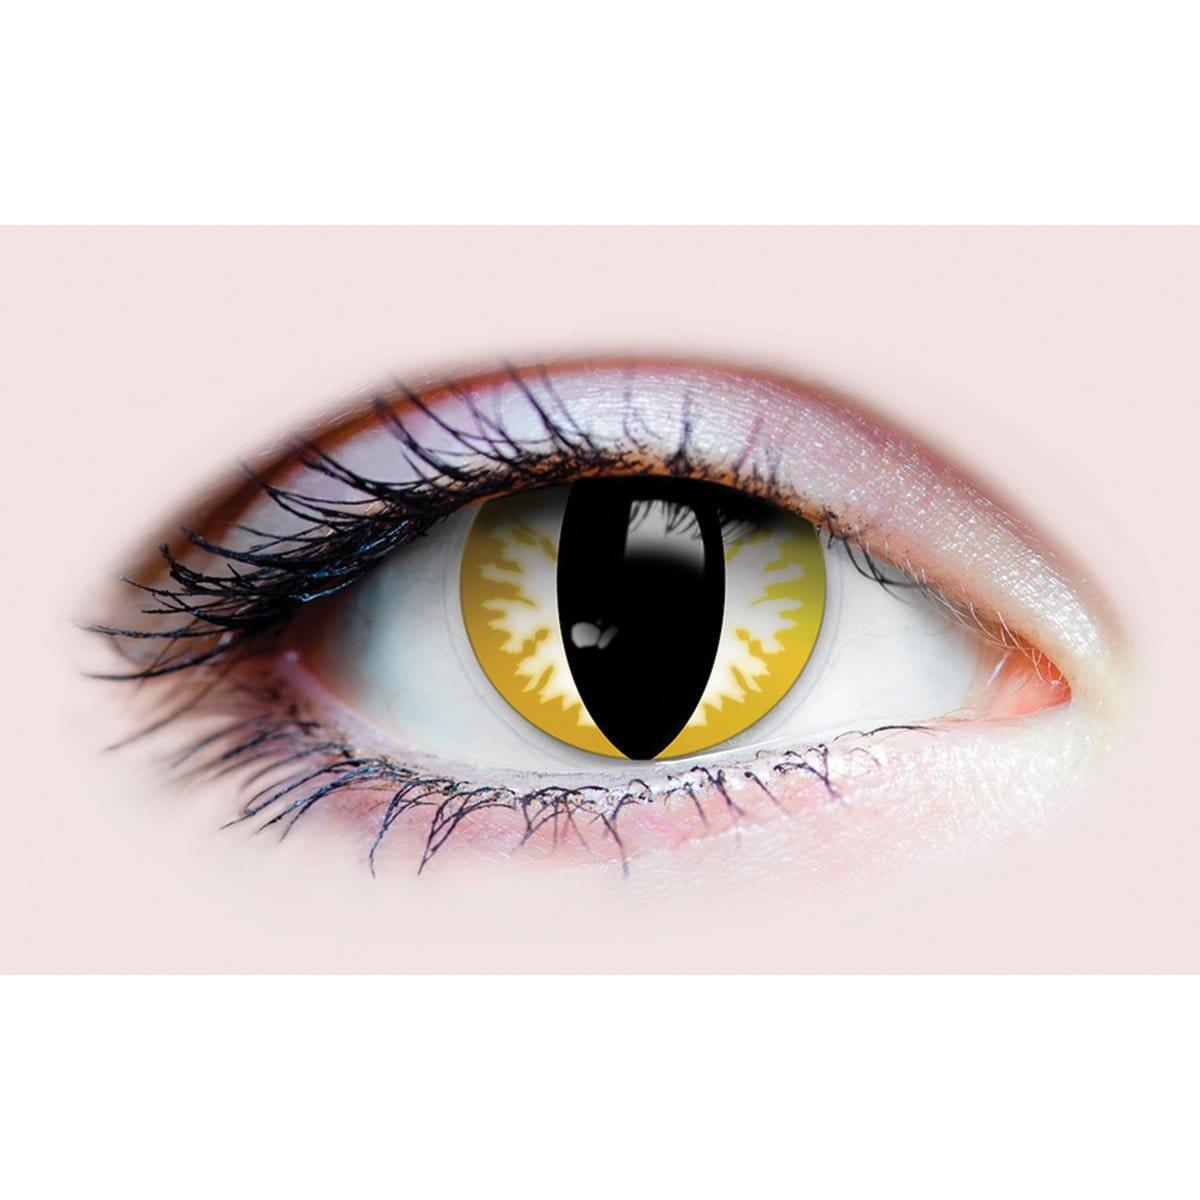 Buy Costume Accessories Thriller contact lenses, 3 months usage sold at Party Expert